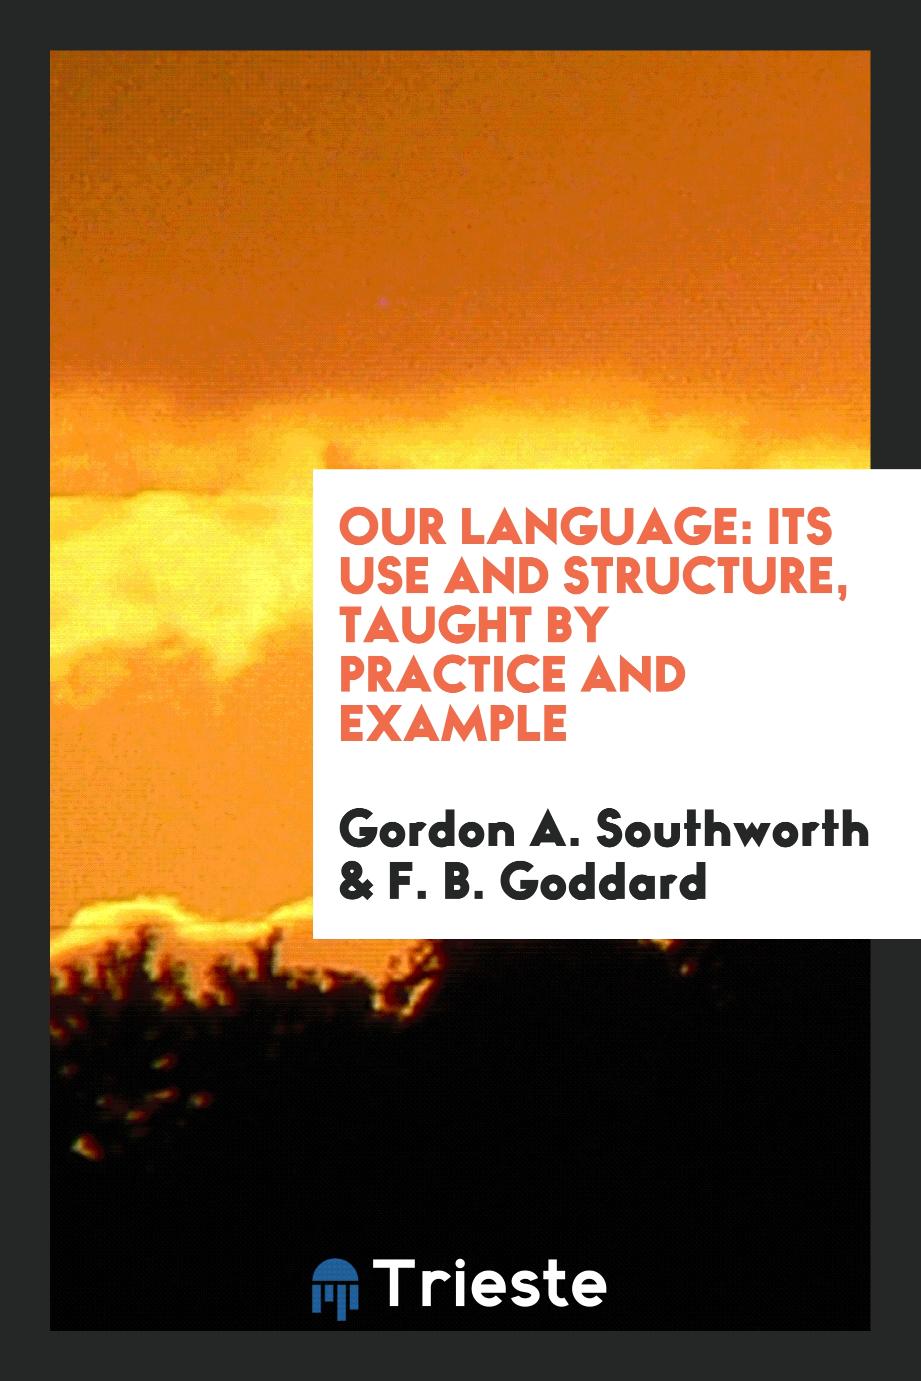 Our Language: Its Use and Structure, Taught by Practice and Example